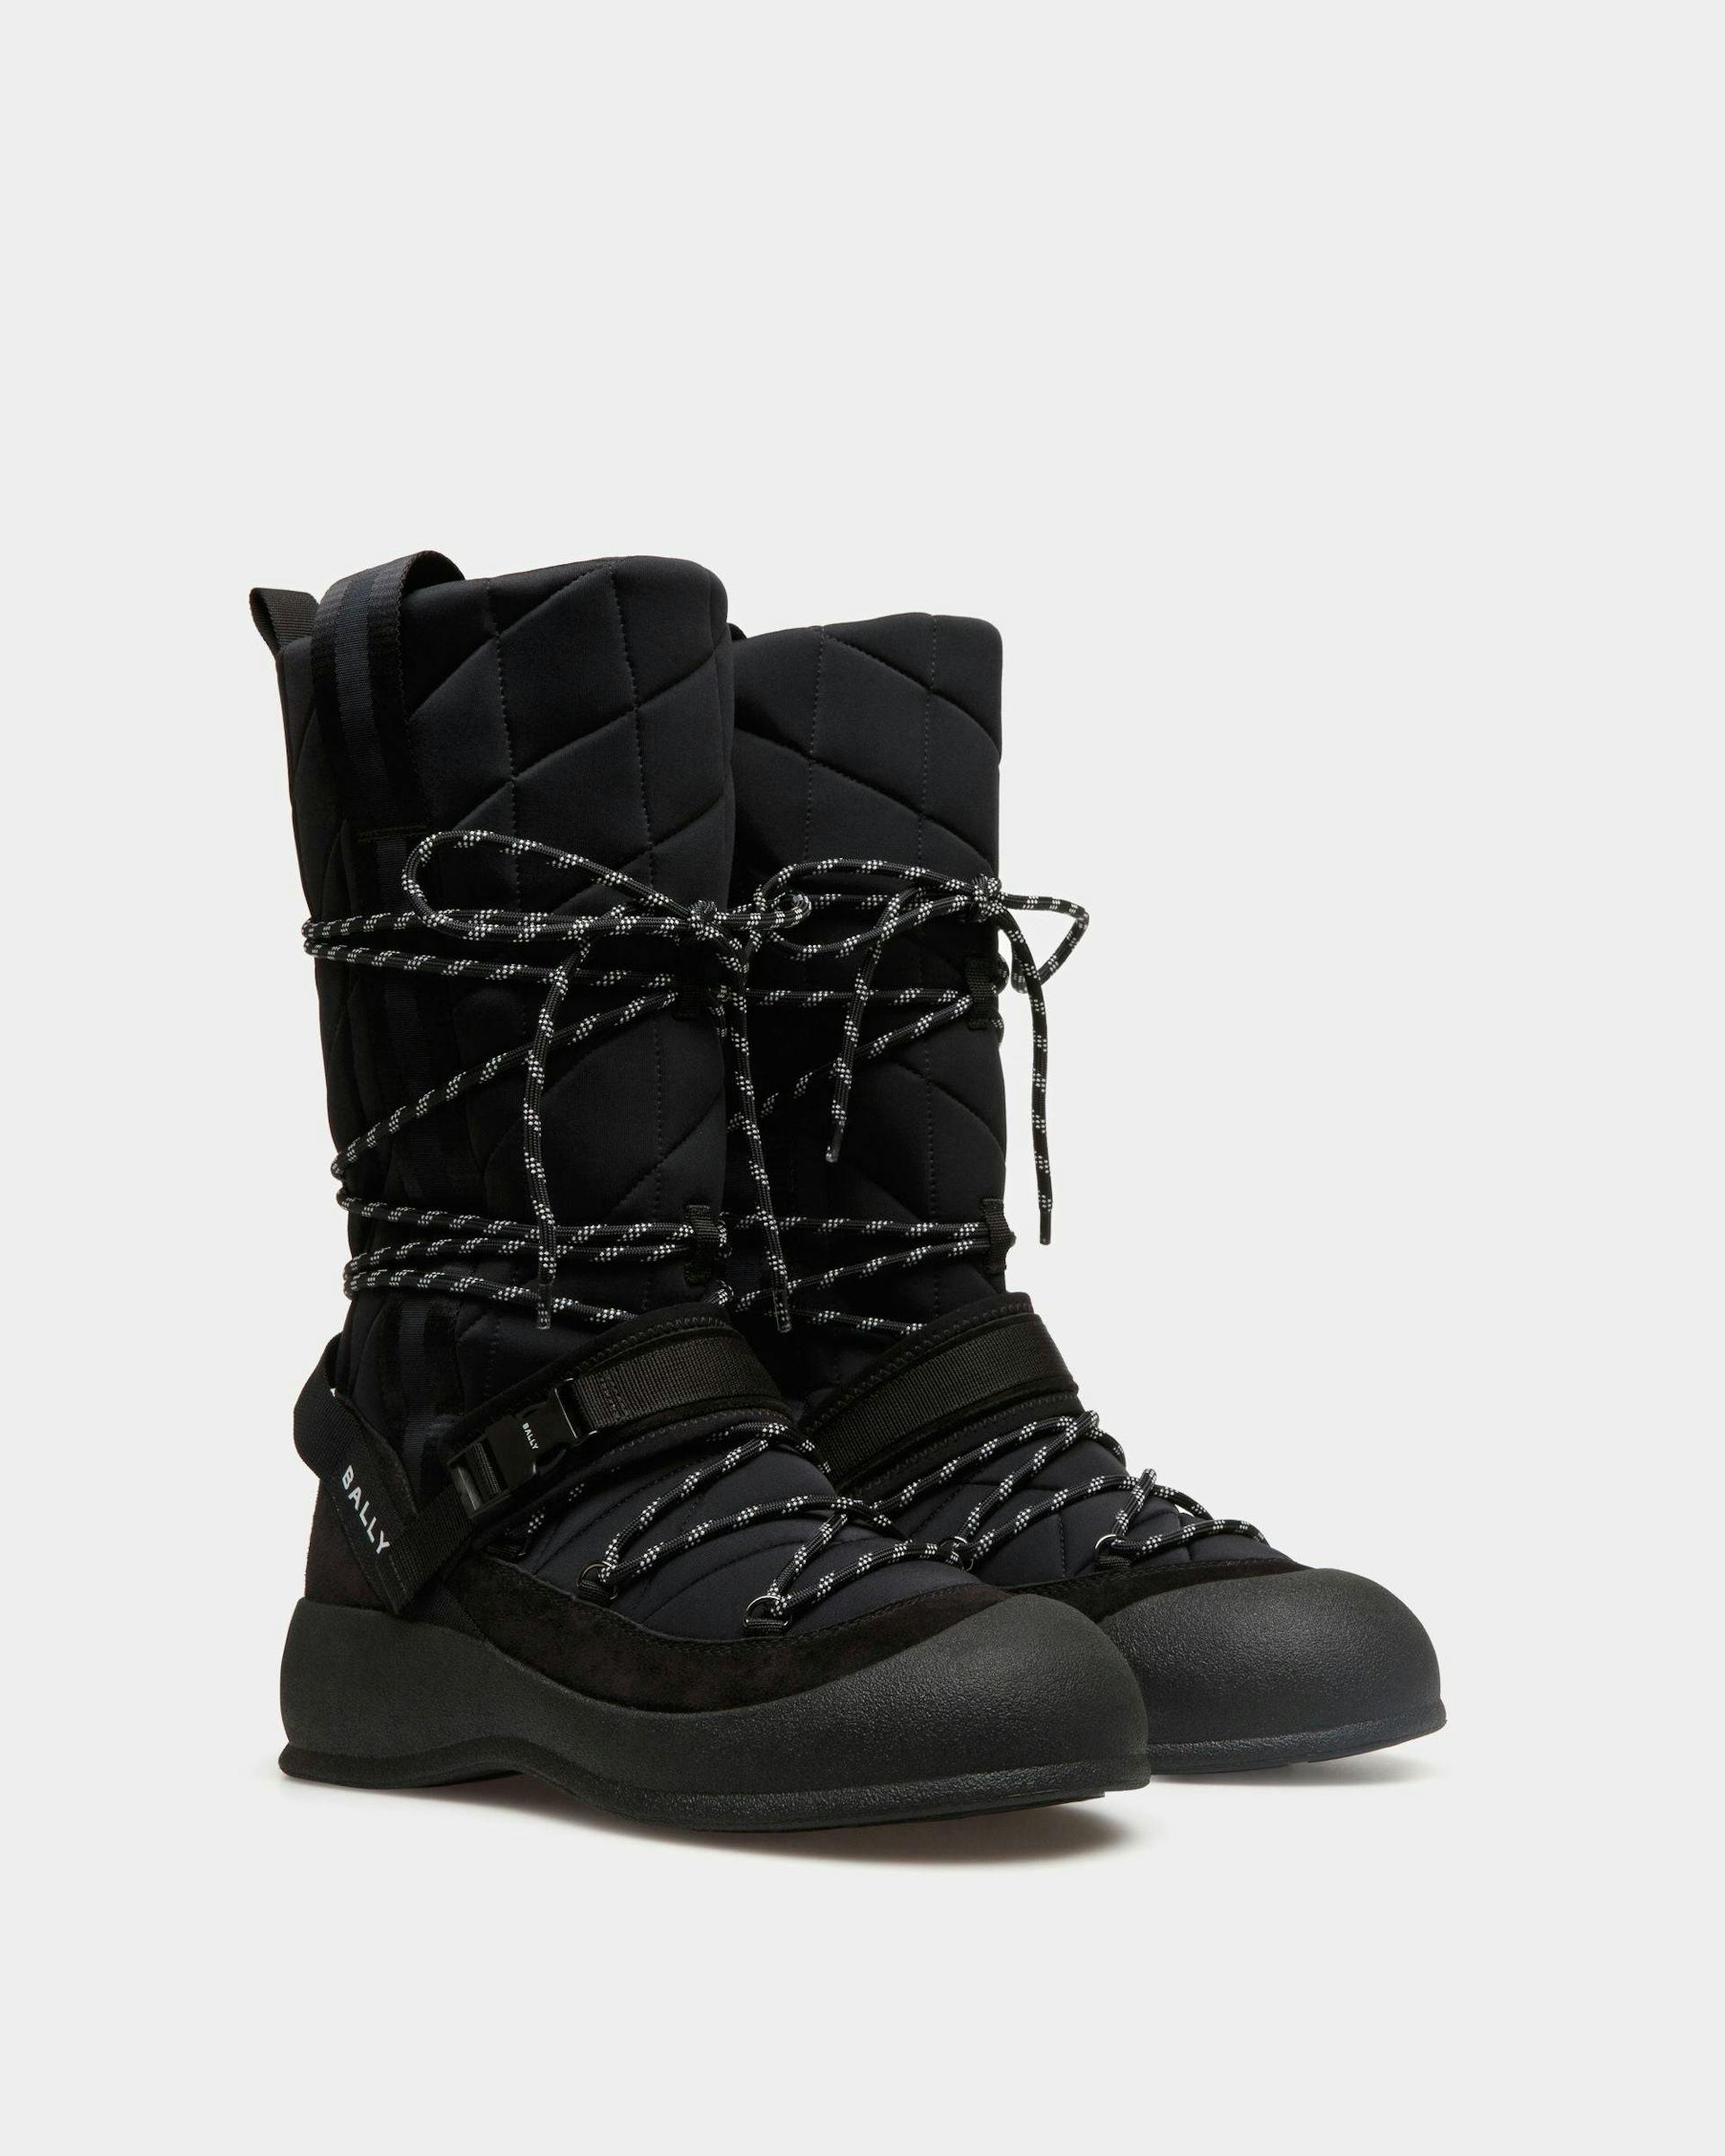 Men's Frei Lace-Up Boot In Black Nylon | Bally | Still Life 3/4 Front